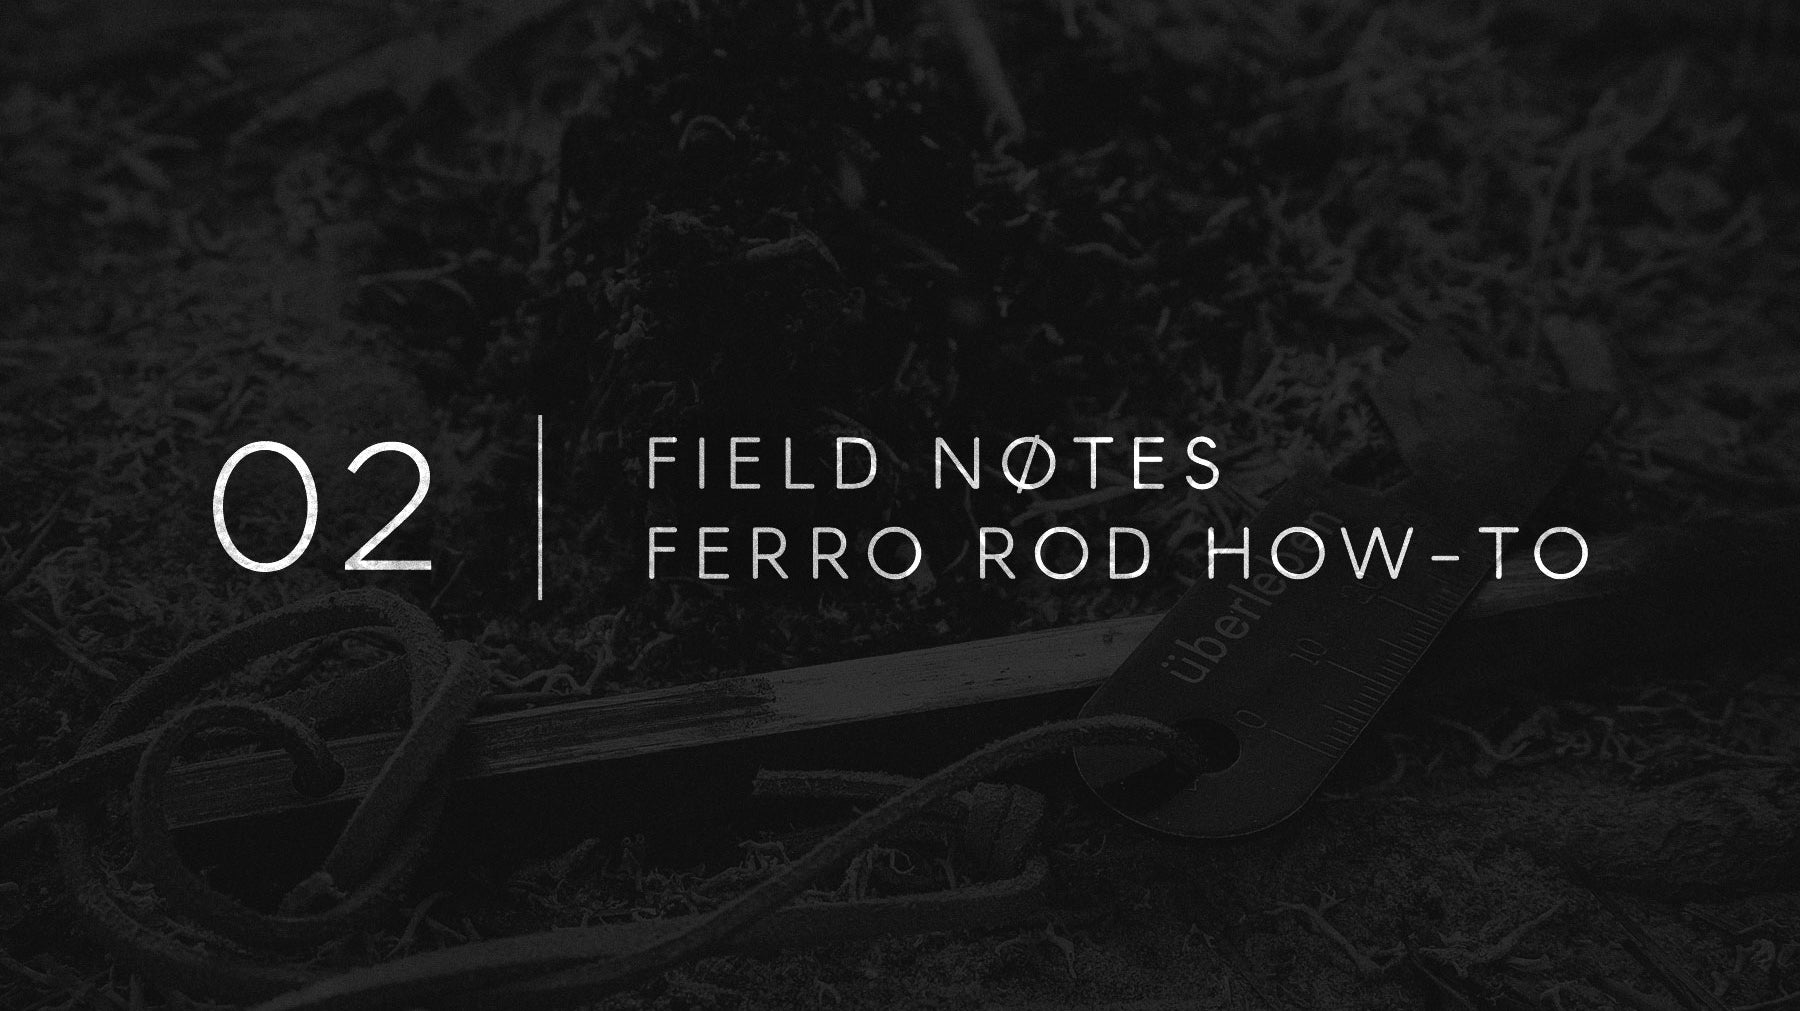 Field Notes 02 - How To Use A Ferro Rod